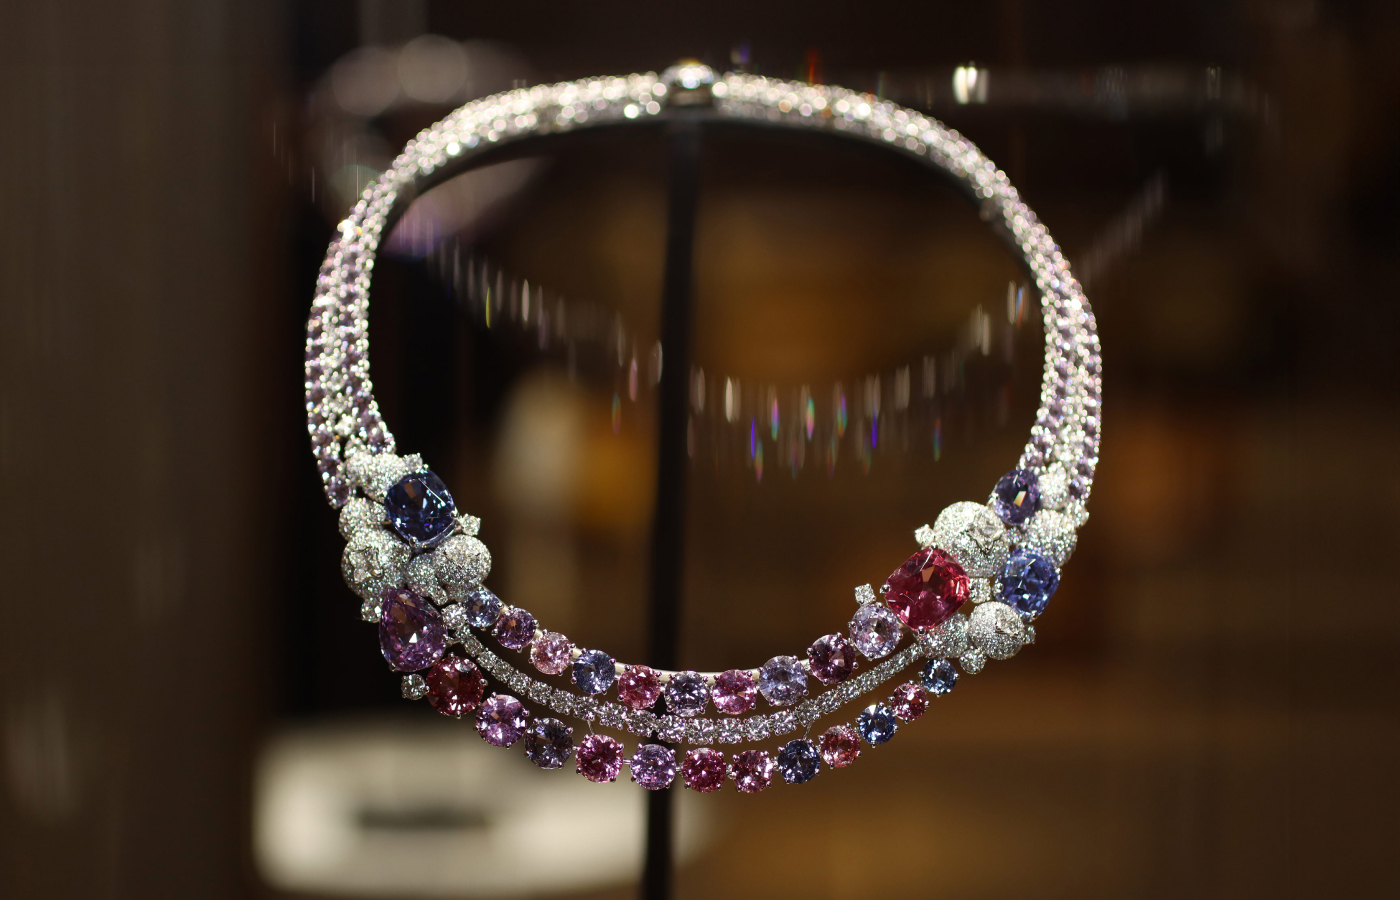 A photograph of the Symbiosis necklace in 18k white gold with two pear-cut purple spinels of 4.13 carats and 10.11 carats, one cushion-cut pink spinel of 10.03 carats, one cushion-cut purple spinel of 8.46 carats, one cushion-cut blue spinel of 10.67 carats and four LV Monogram Star-cut diamonds for 1.89 carats, plus further spinels and diamonds, part of the Louis Vuitton Deep Time Chapter II High Jewellery collection